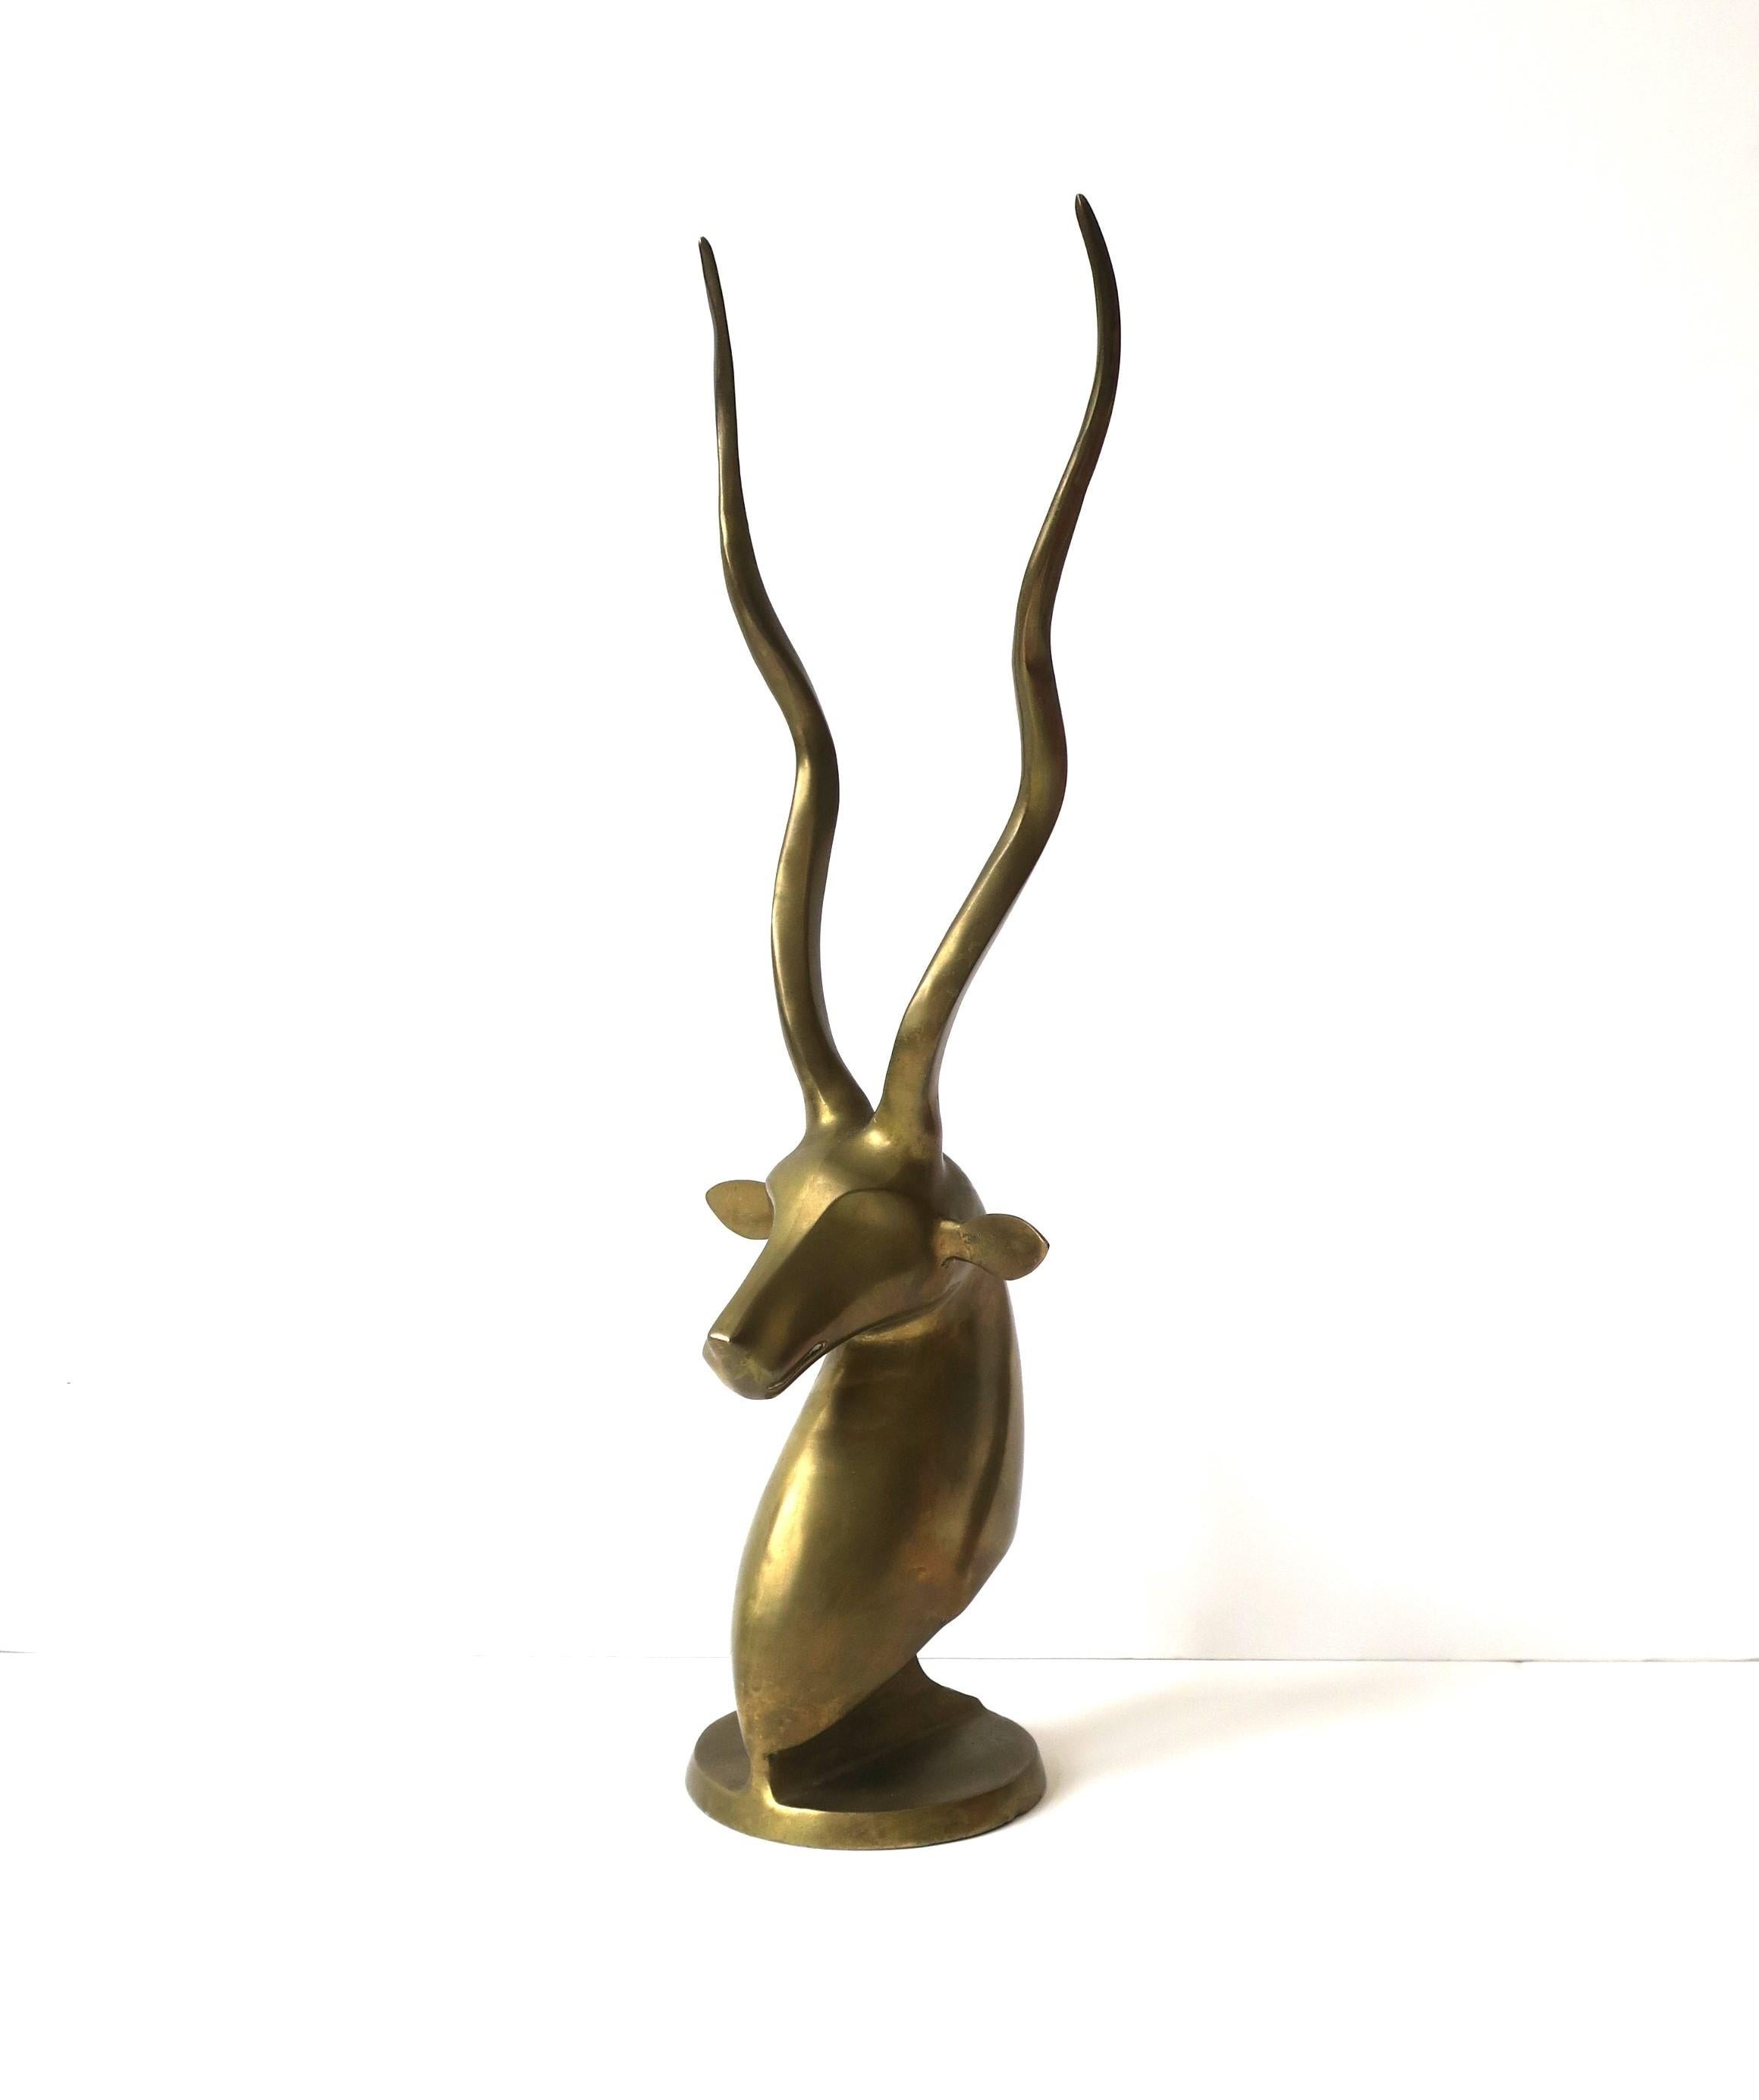 A brass animal Gazelle antelope bust sculpture decorative object with tall antlers, circa late-20th century, 1970s. Dimensions: 21.5